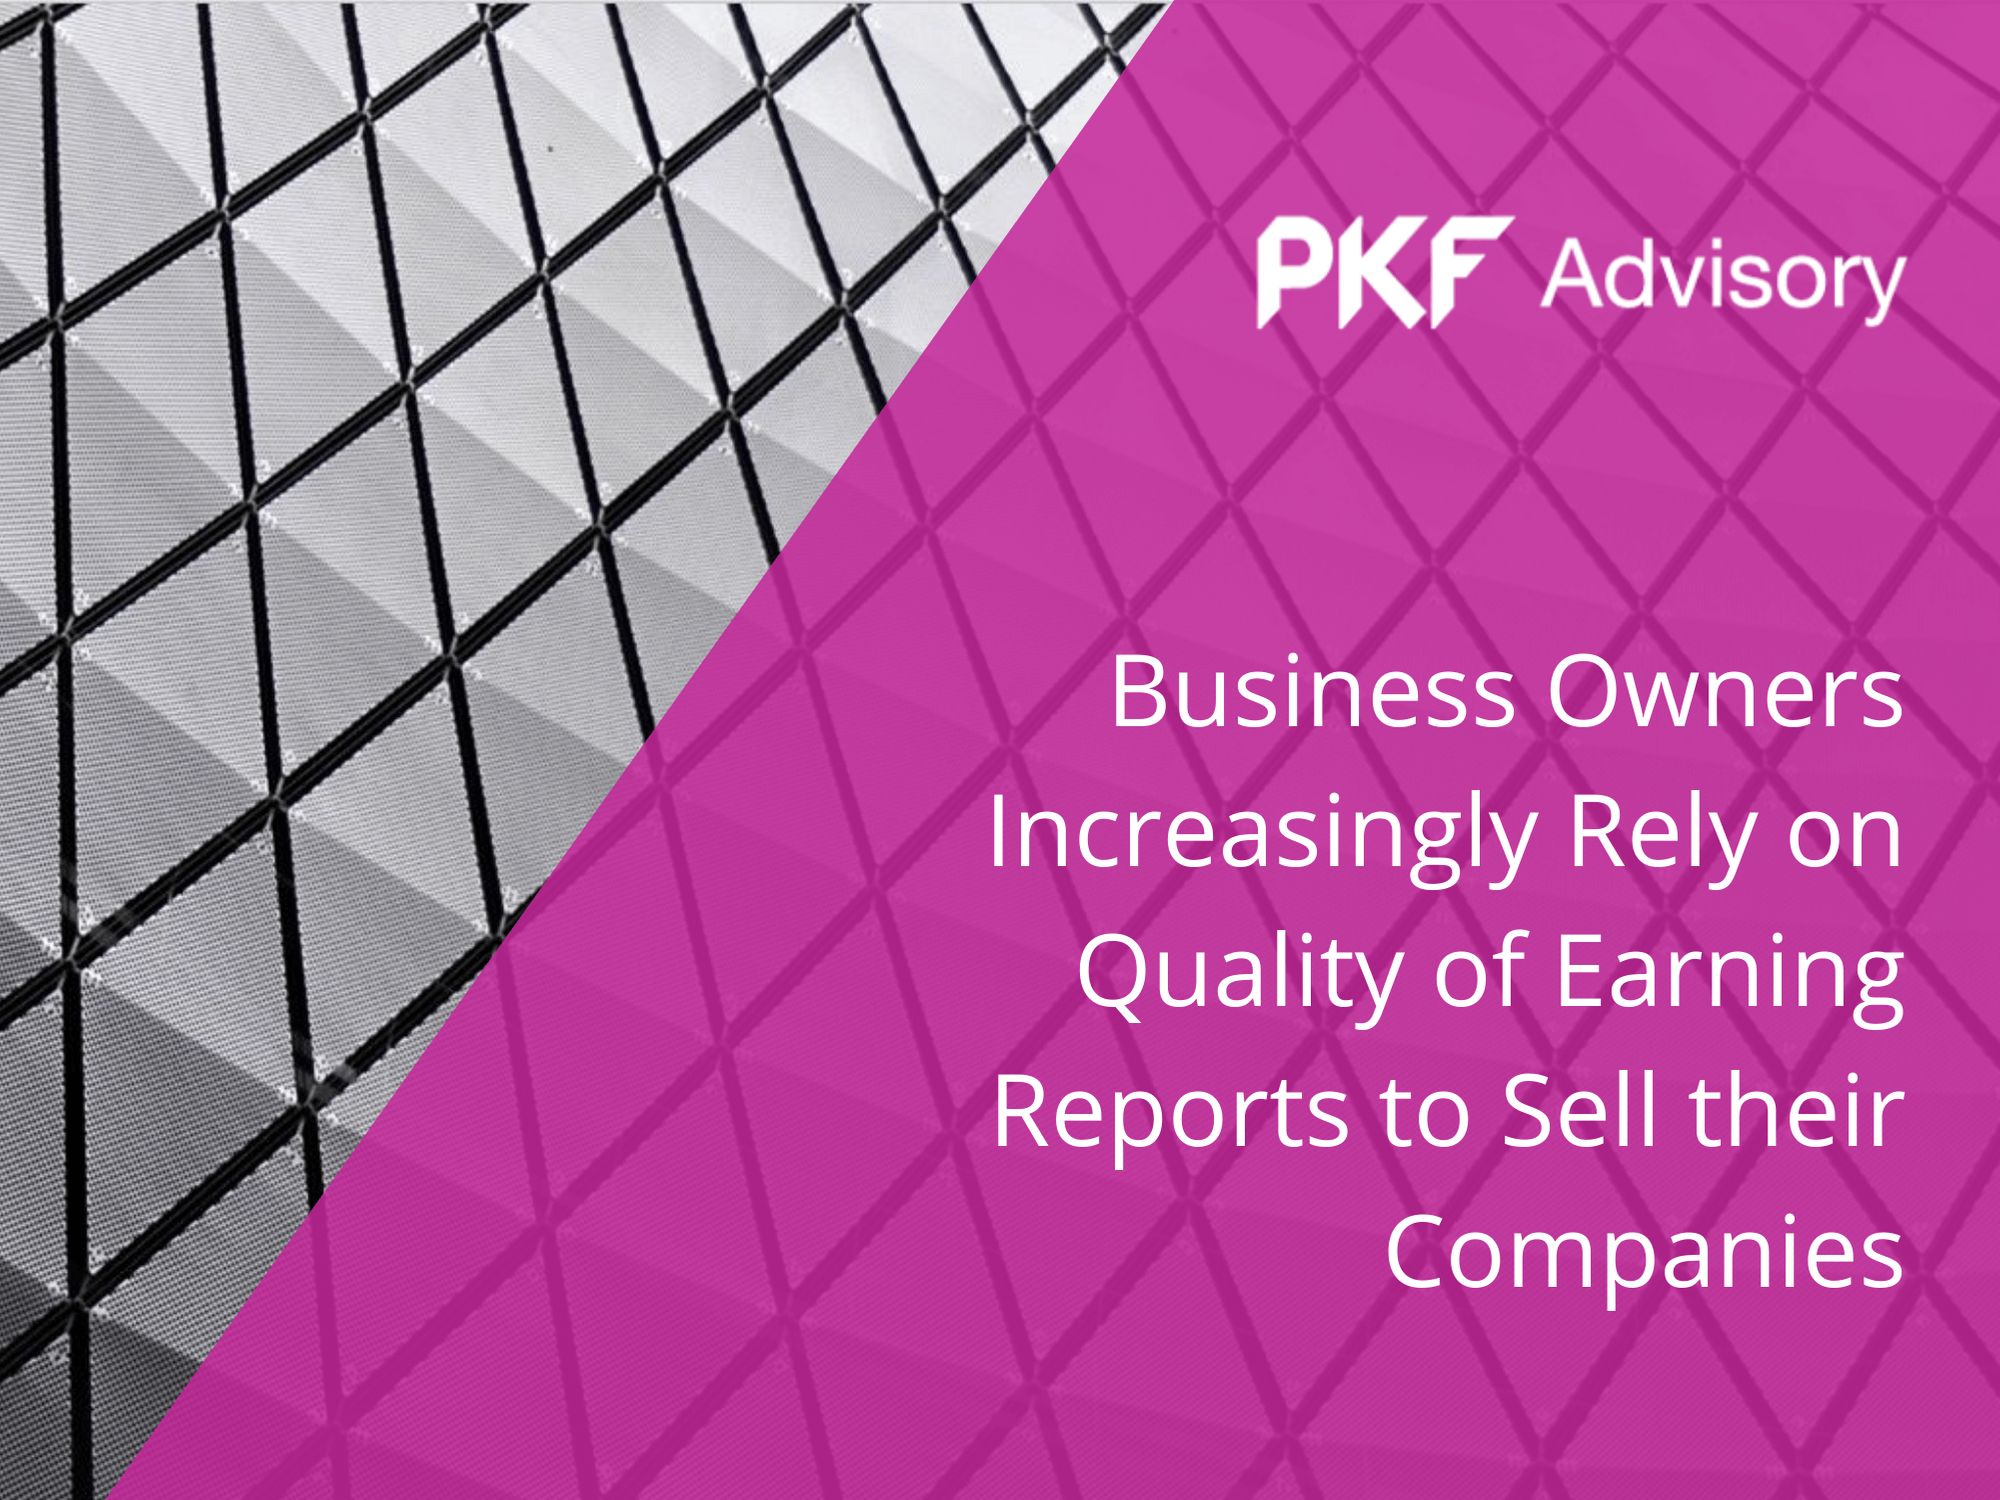 Business Owners Increasingly Rely on Quality of Earning (QOE) Reports to Sell Their Companies - PKF Advisory